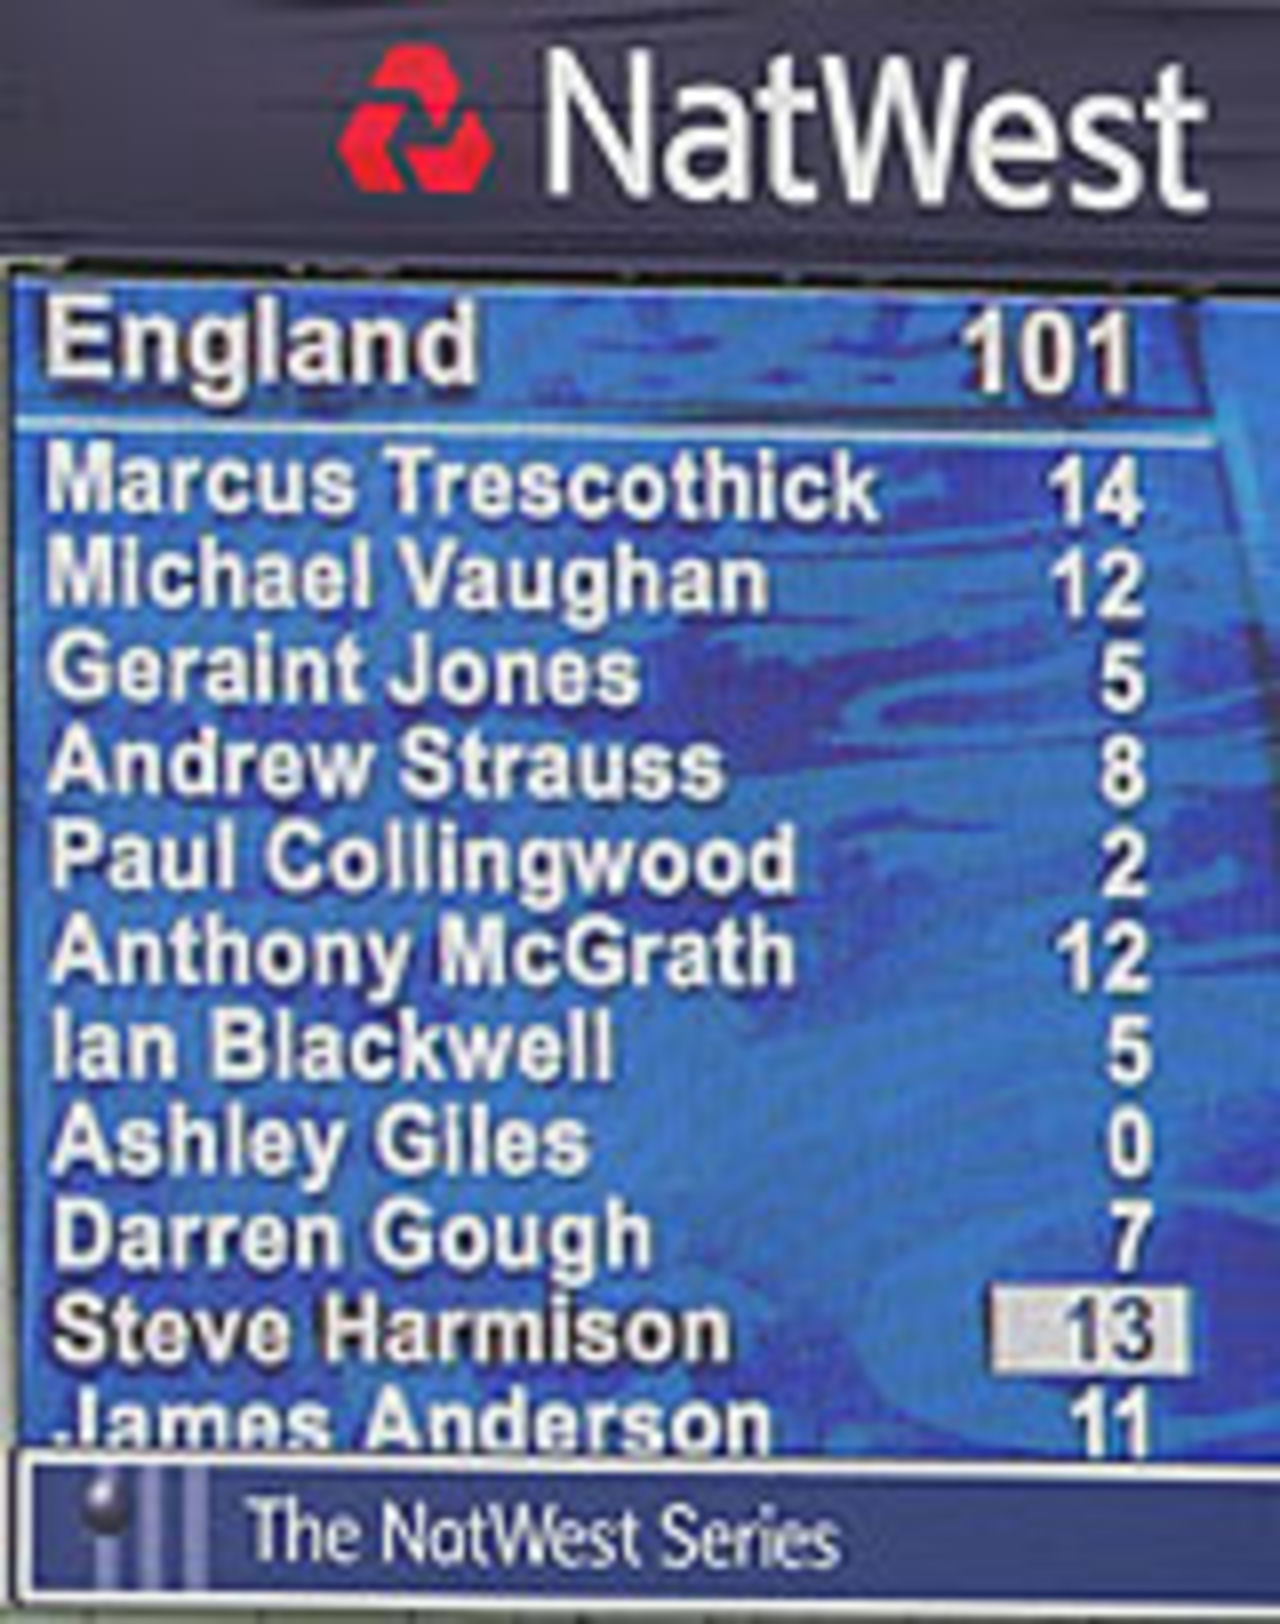 The scoreboard tells a sorry tale at Chester-le-Street, England V New Zealand, NatWest Series, 29 June 2004